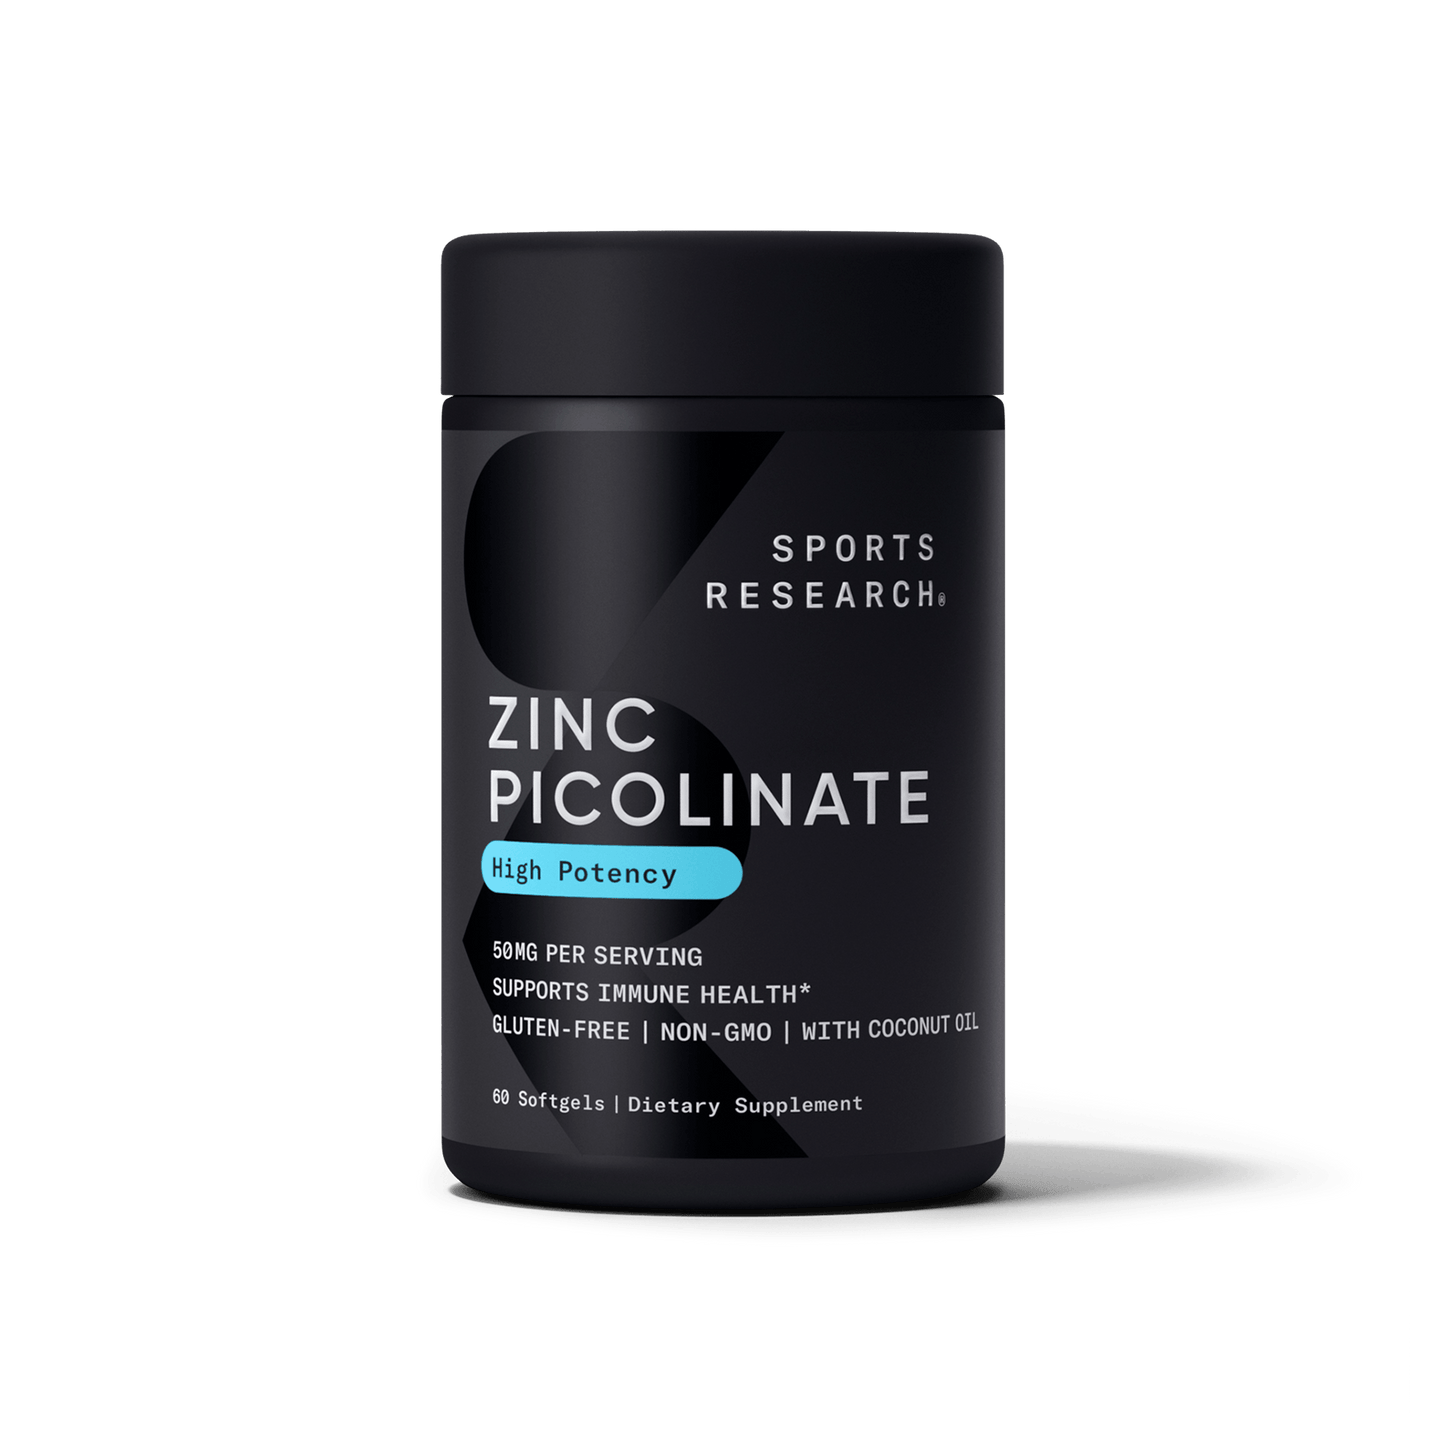 Zinc Picolinate with Coconut Oil by Sports Research.